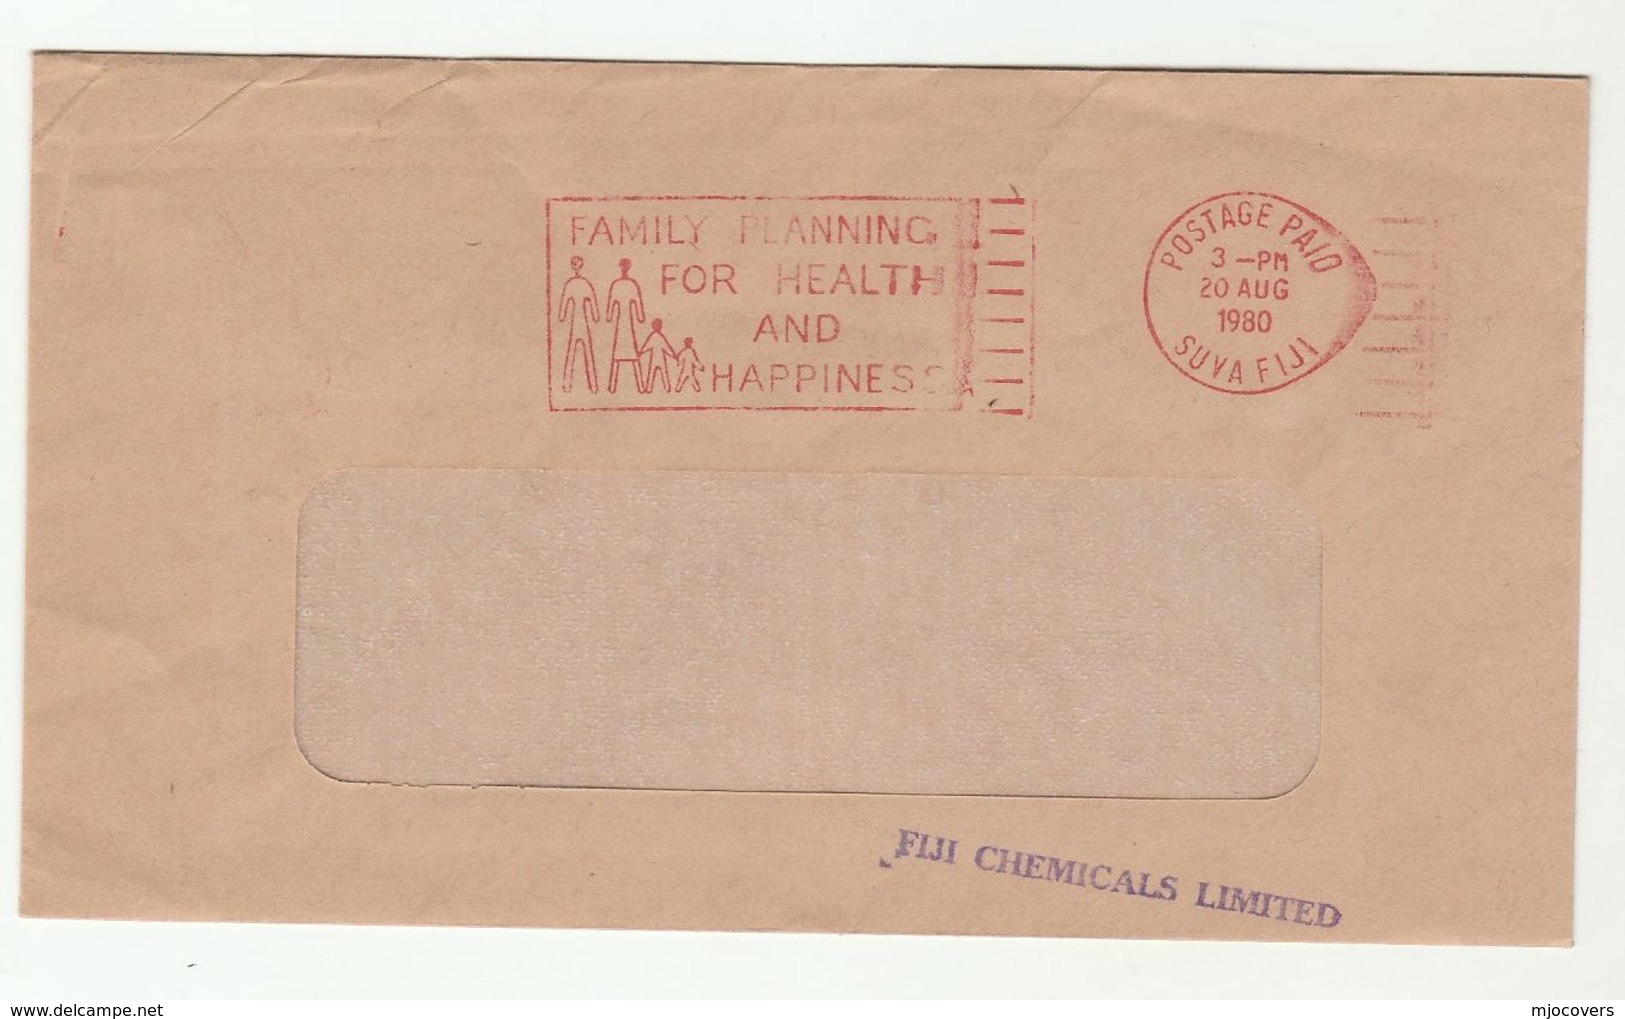 1980 FIJI  COVER FJI CHEMICALS Ltd METER Stamps SLOGAN FAMILY PLANNING FOR HEALTH HAPPINESS - Fiji (1970-...)